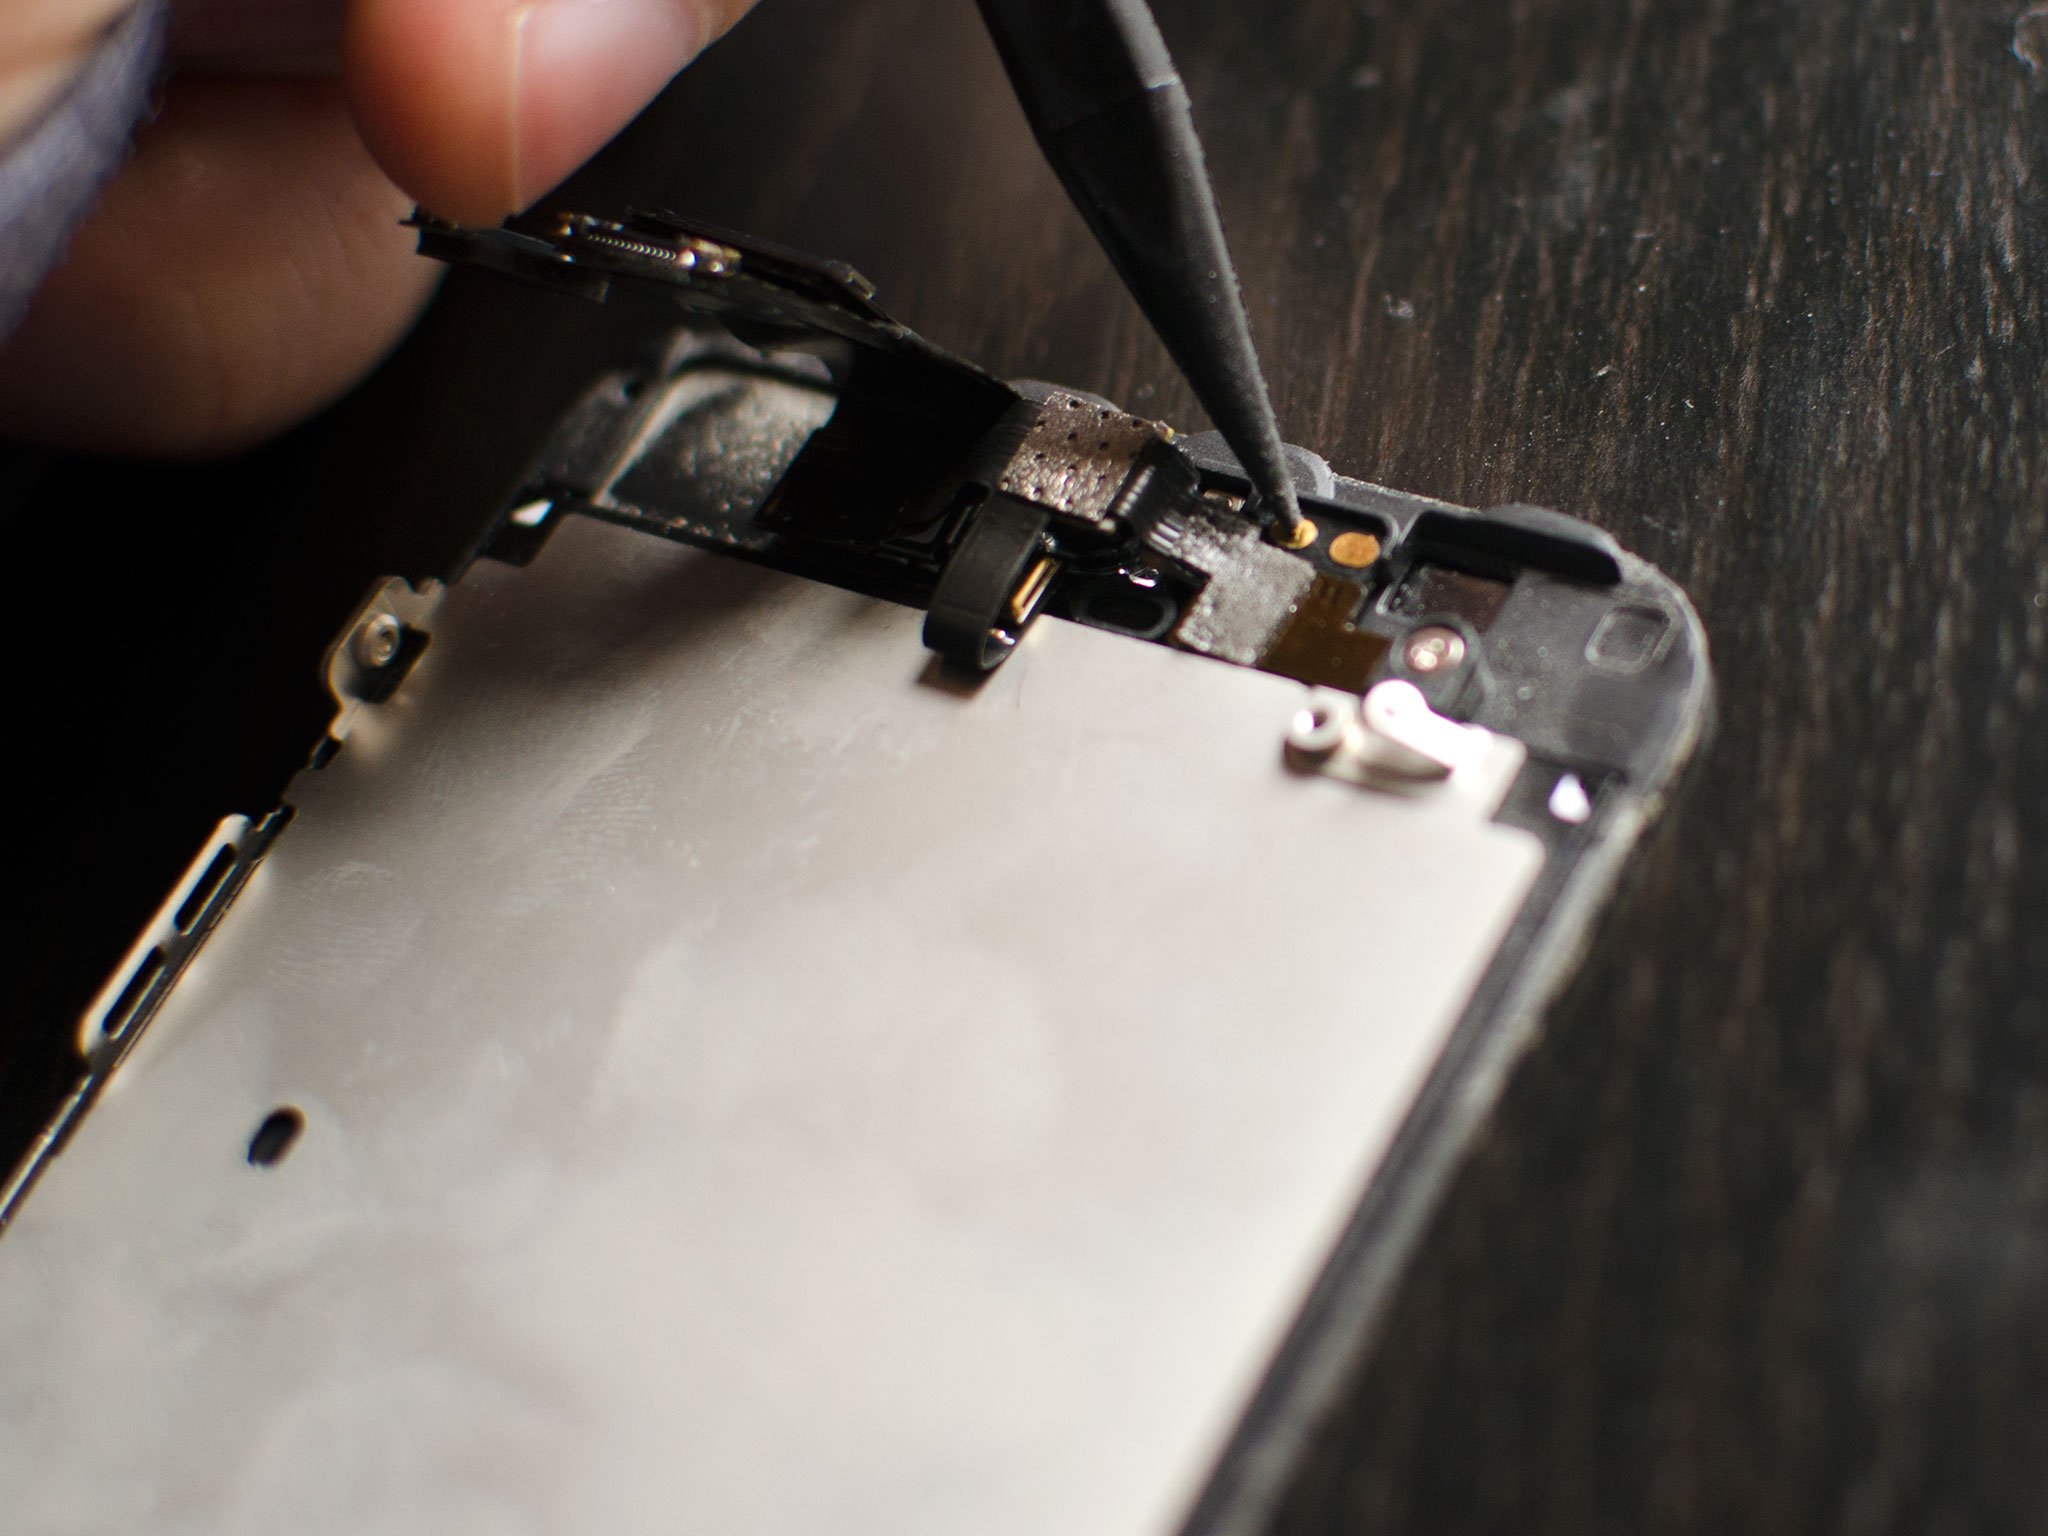 How to DIY replace the front-facing FaceTime camera and sensor cable on the iPhone 5